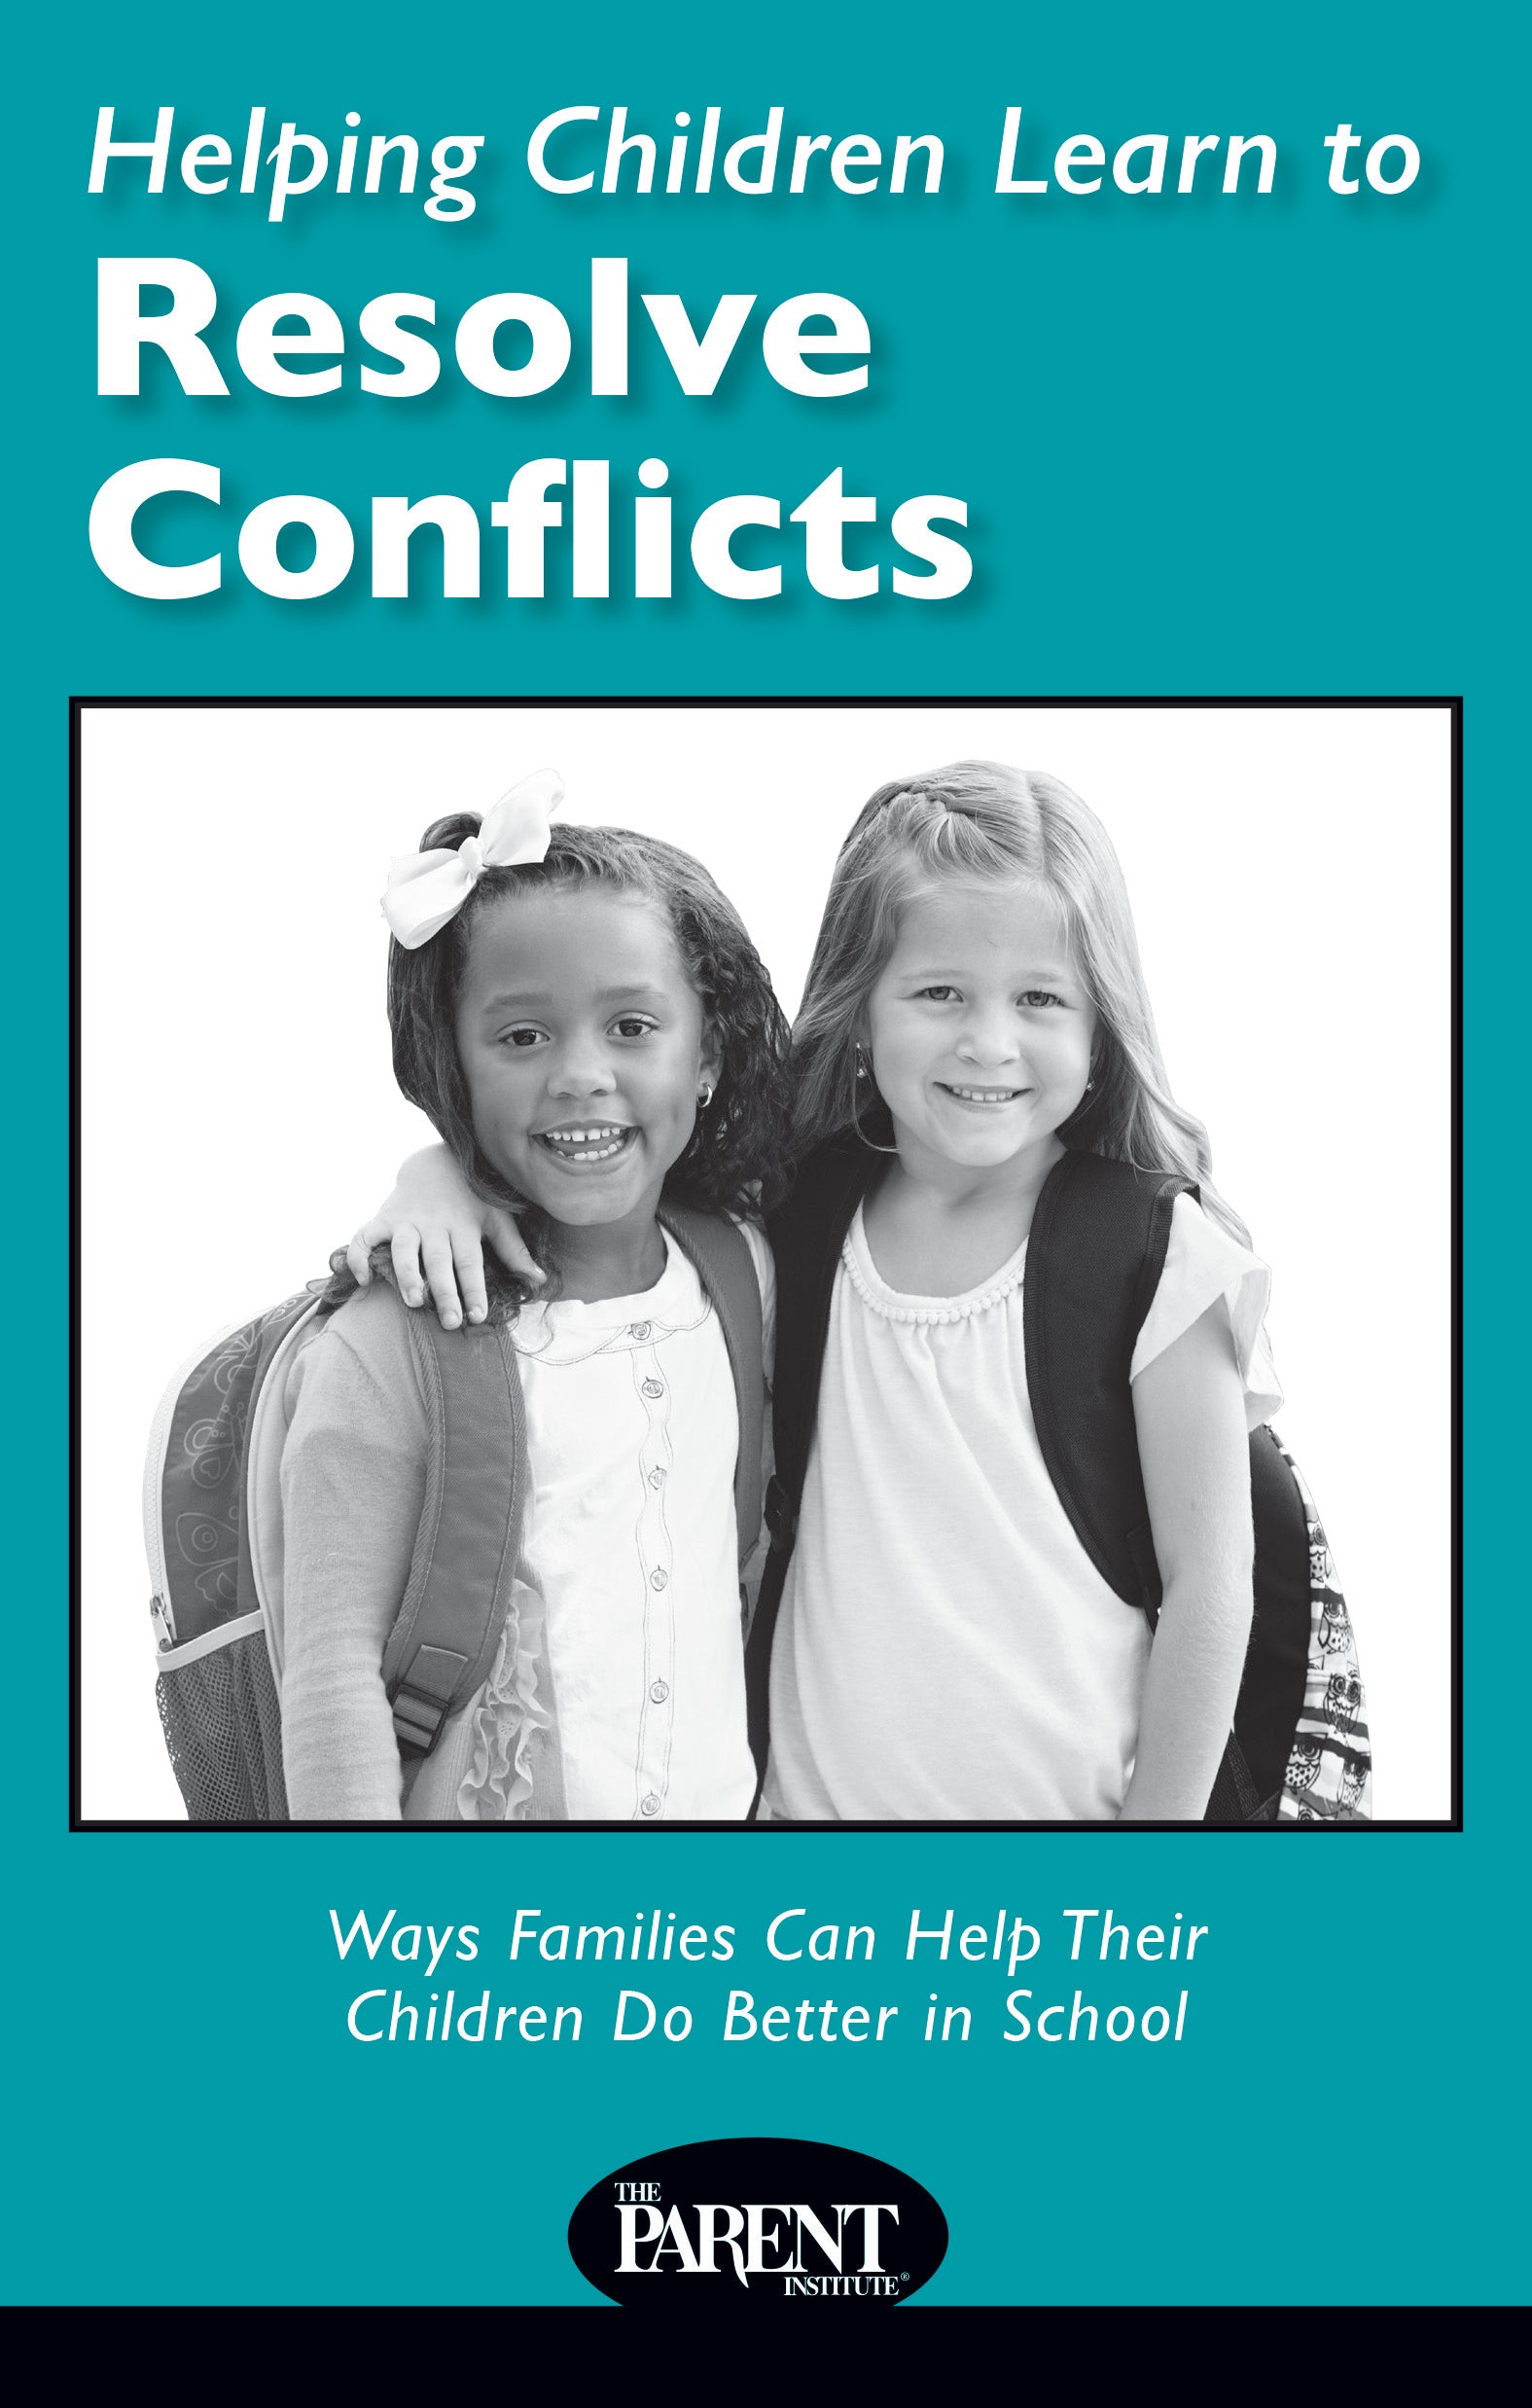 Helping Children Learn to Resolve Conflicts